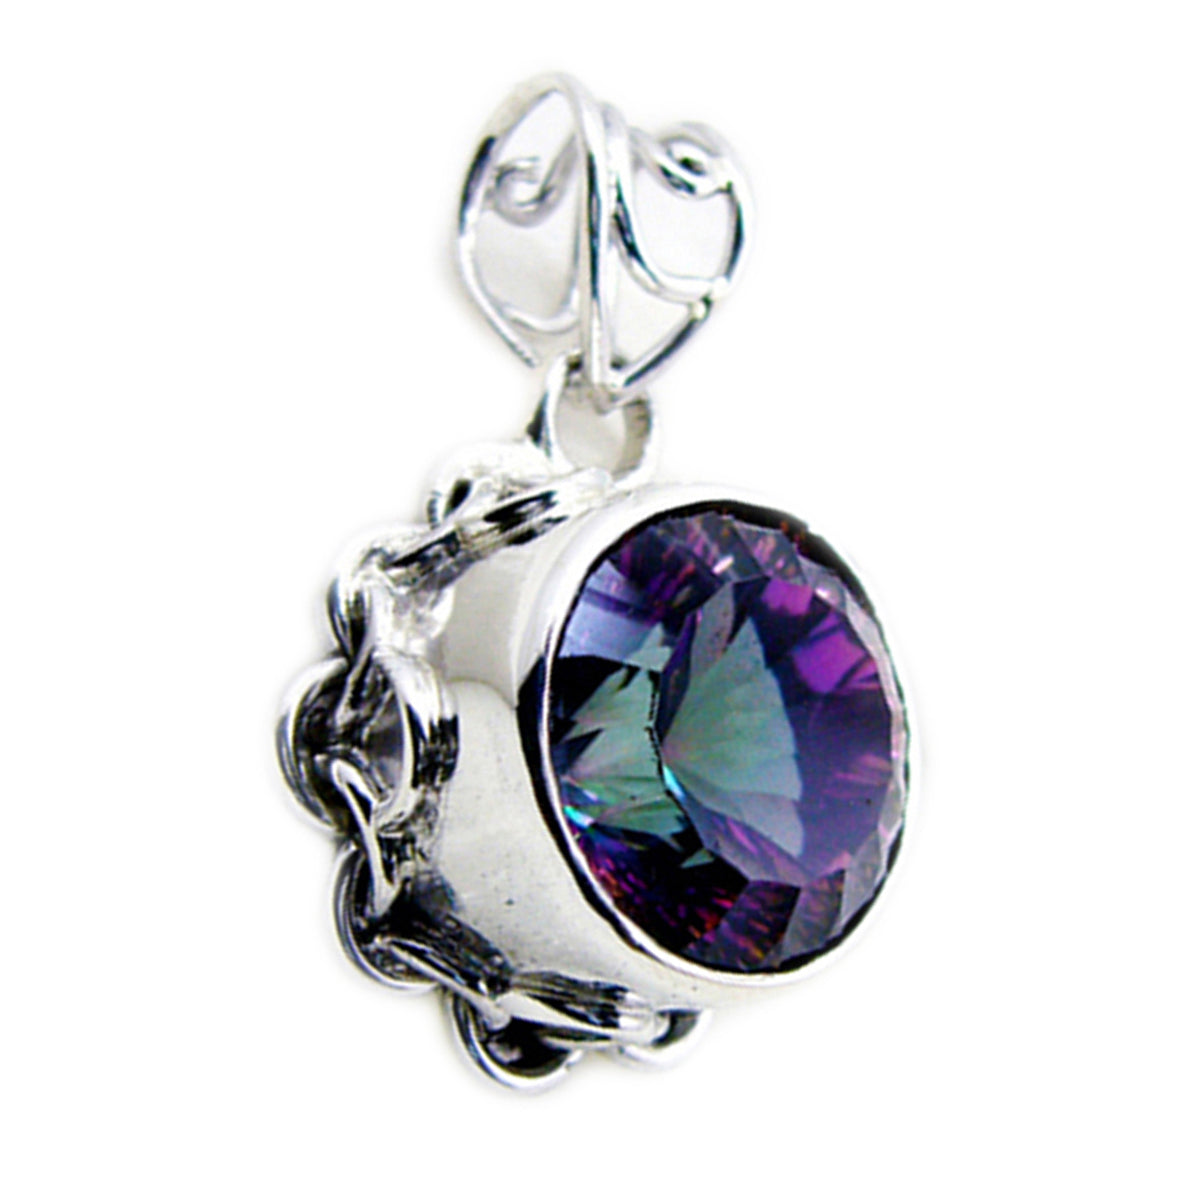 Riyo Beddable Gemstone Round Faceted Multi Color Mystic Quartz Sterling Silver Pendant Gift For Friend